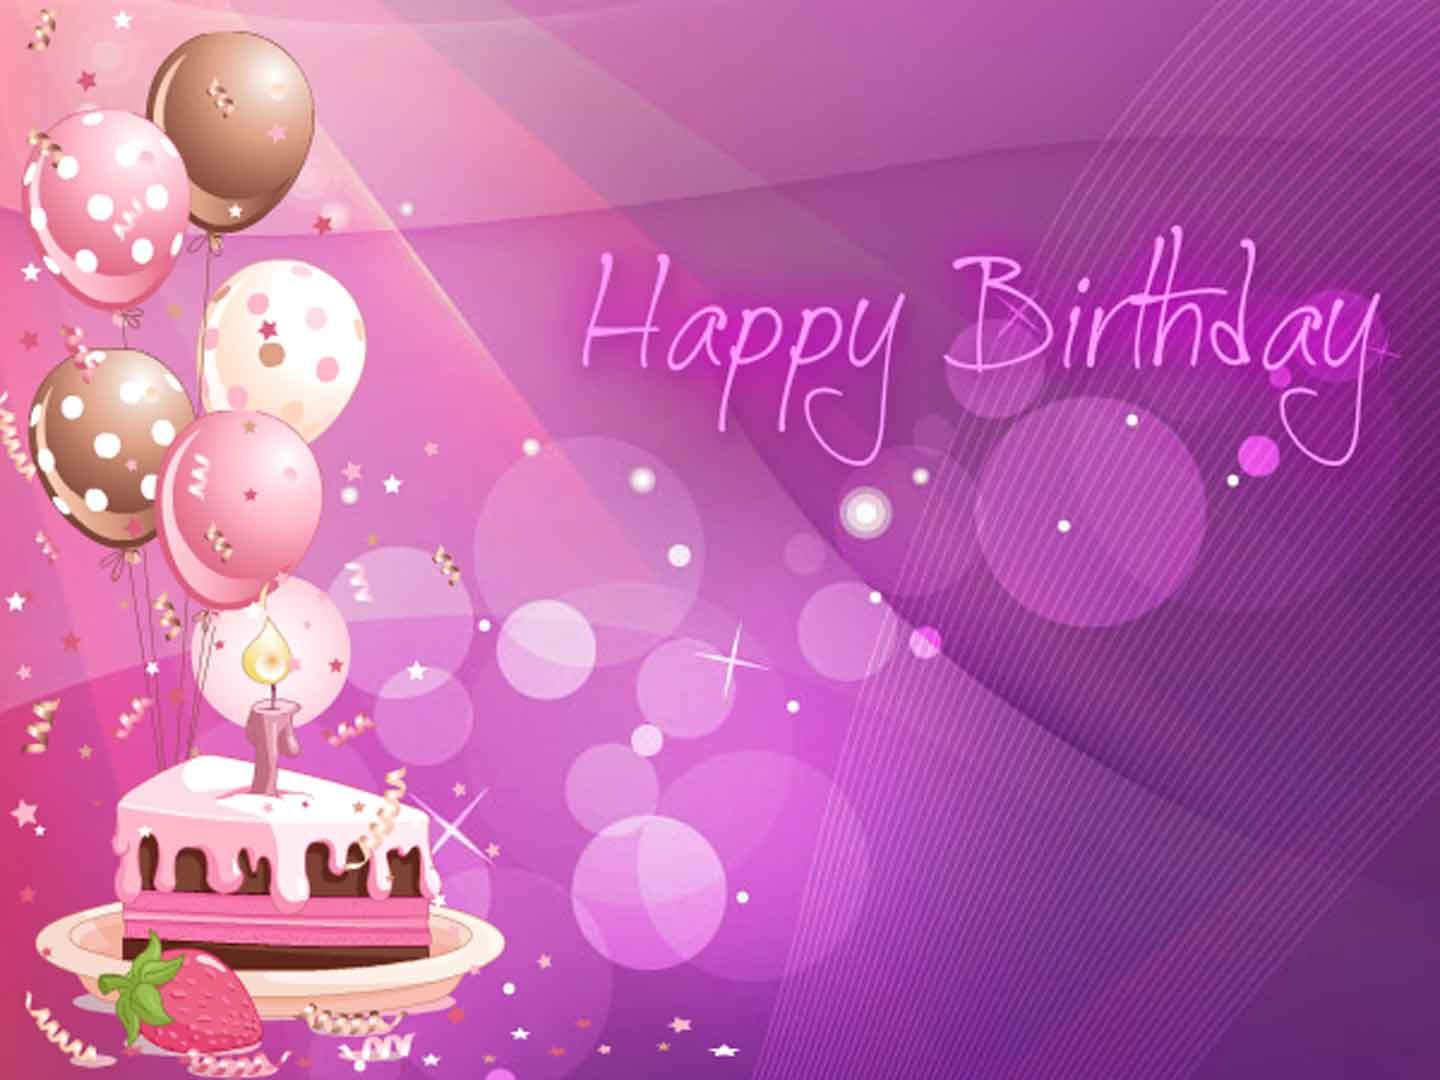 Free download Download Wallpaper Background Happy Birthday Cake Wallpaper [1440x1080] for your Desktop, Mobile & Tablet. Explore Happy Birthday Desktop Wallpaper Free. Happy Birthday Wallpaper Image, Happy Birthday Background